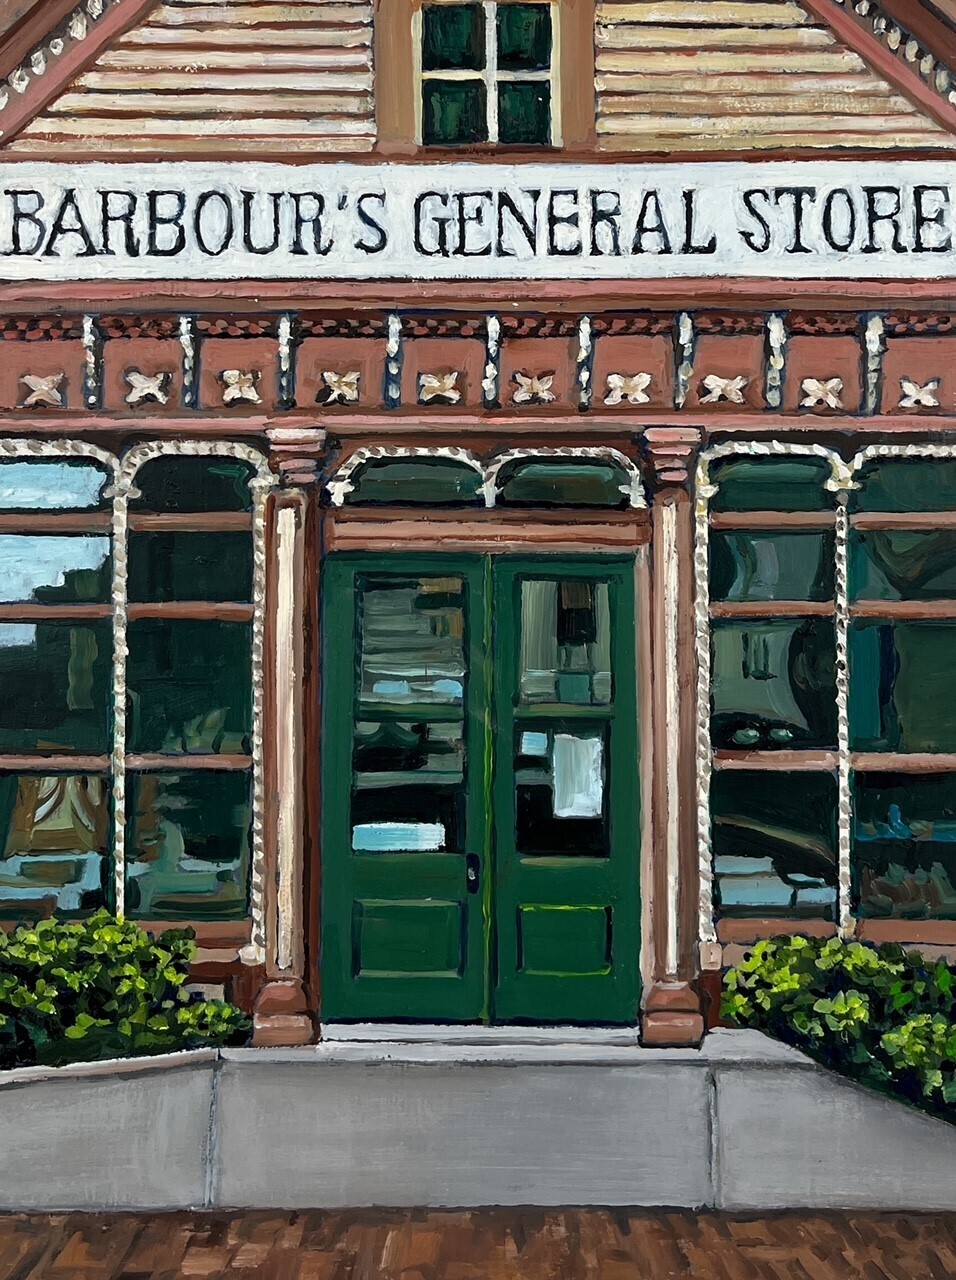 "Barbour's General Store" 9x12" Acrylic & Oil